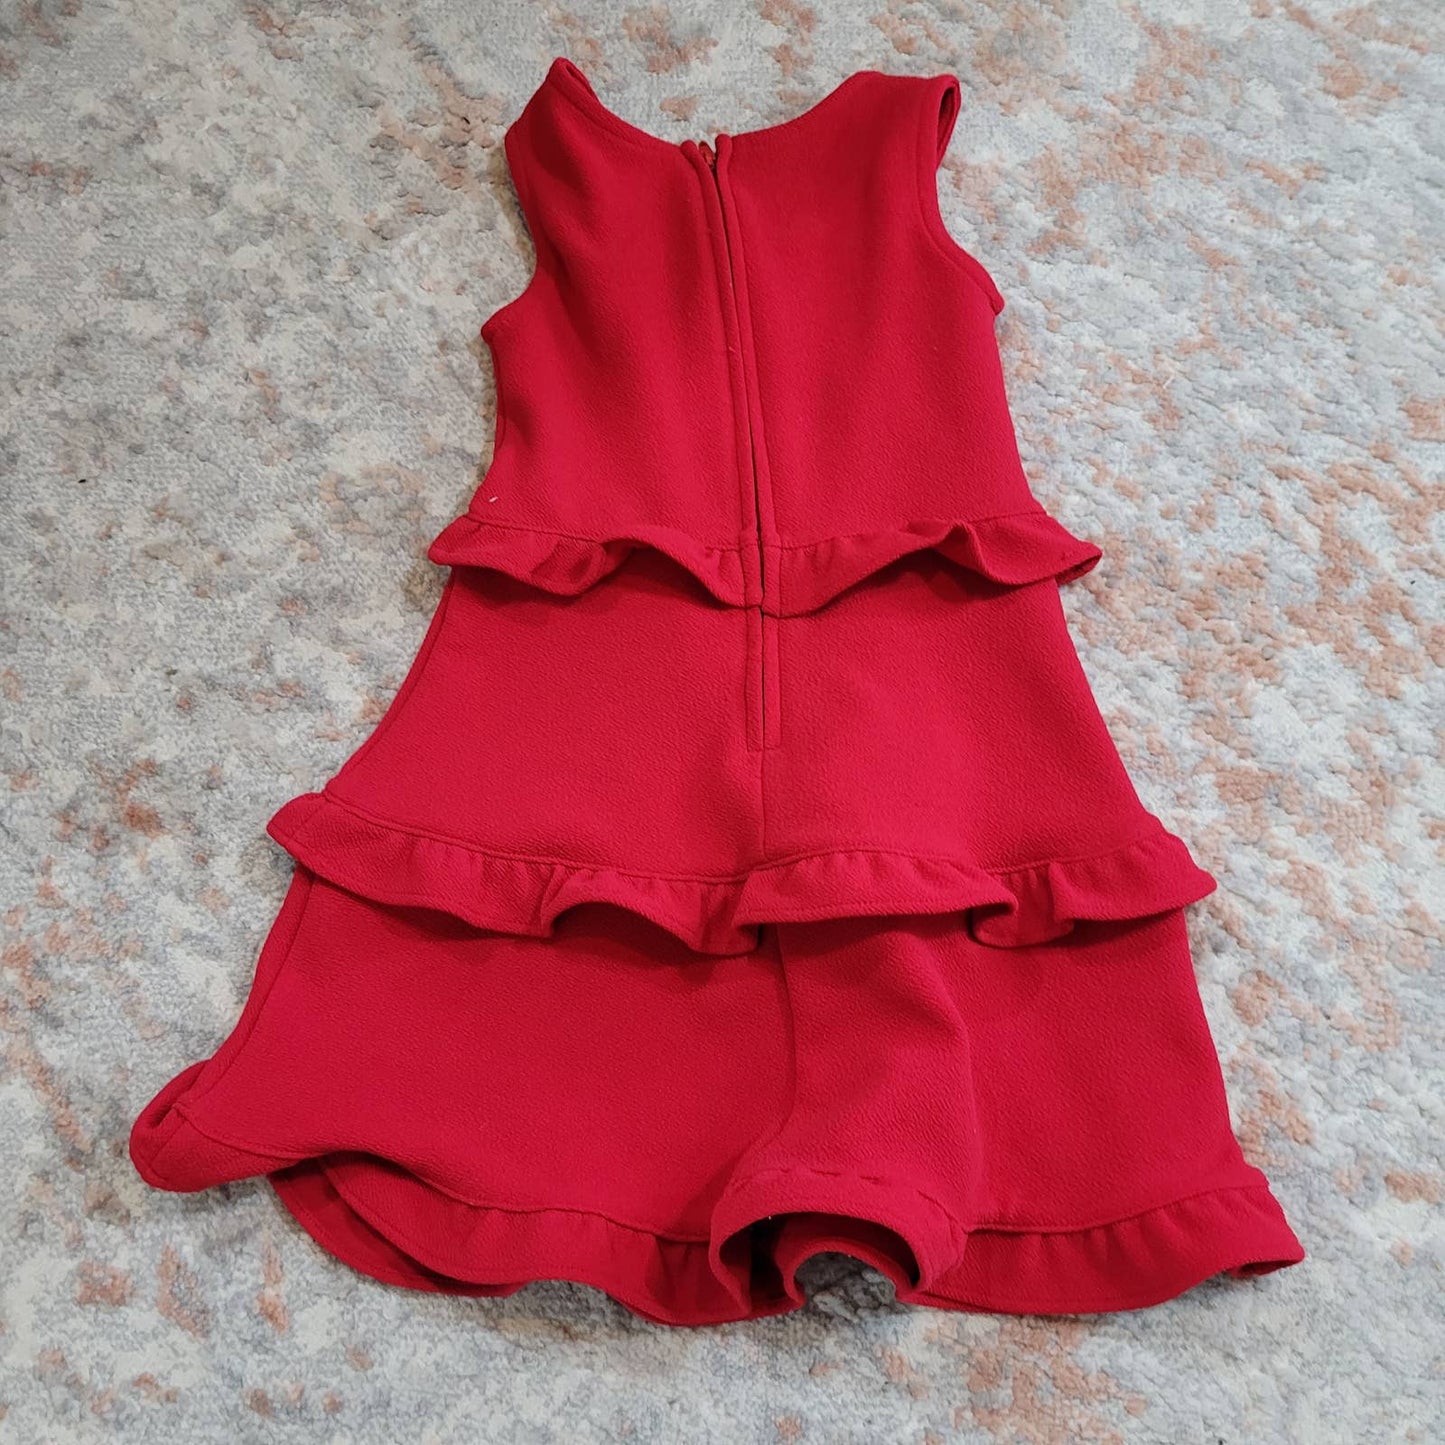 Place Red Ruffled Dress - Size 4